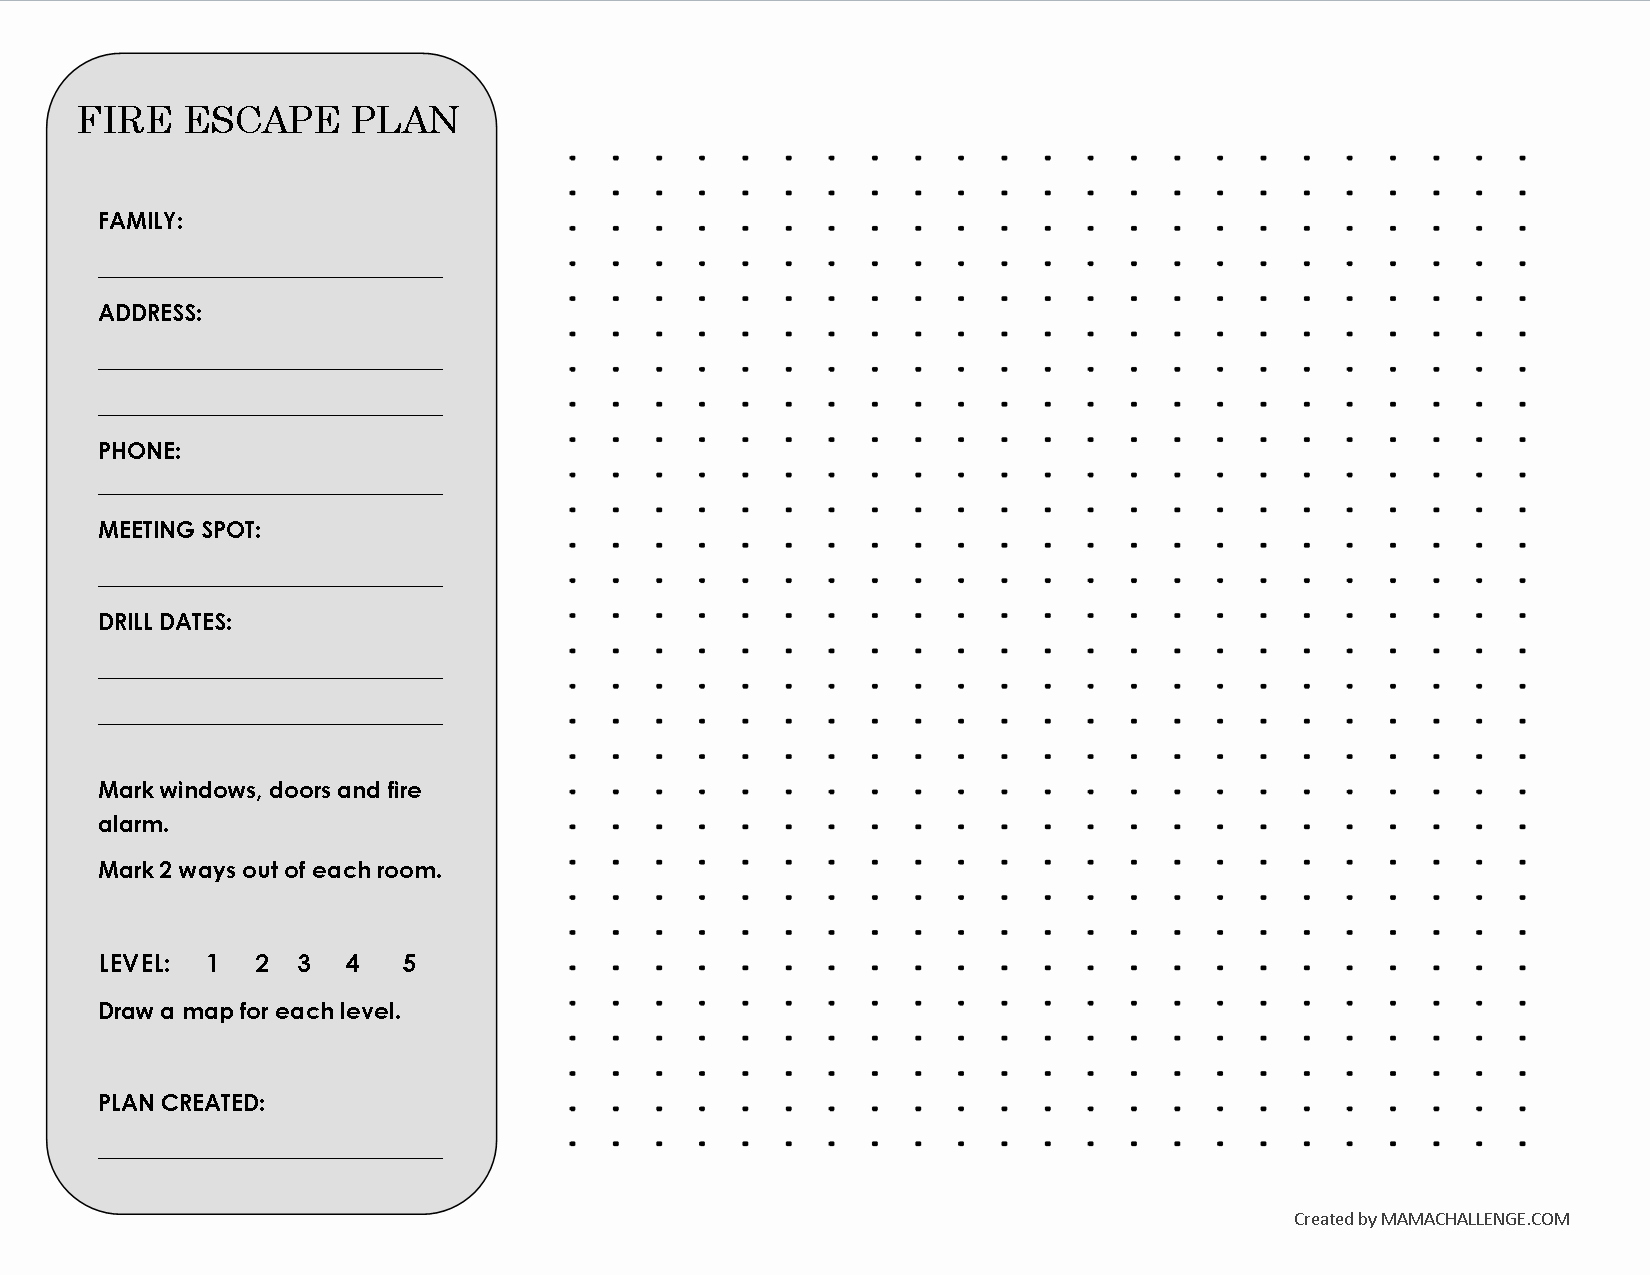 Printable Fire Escape Plan Template Lovely Family Fire Escape Plan to Draw Your Fire Escape Plan by